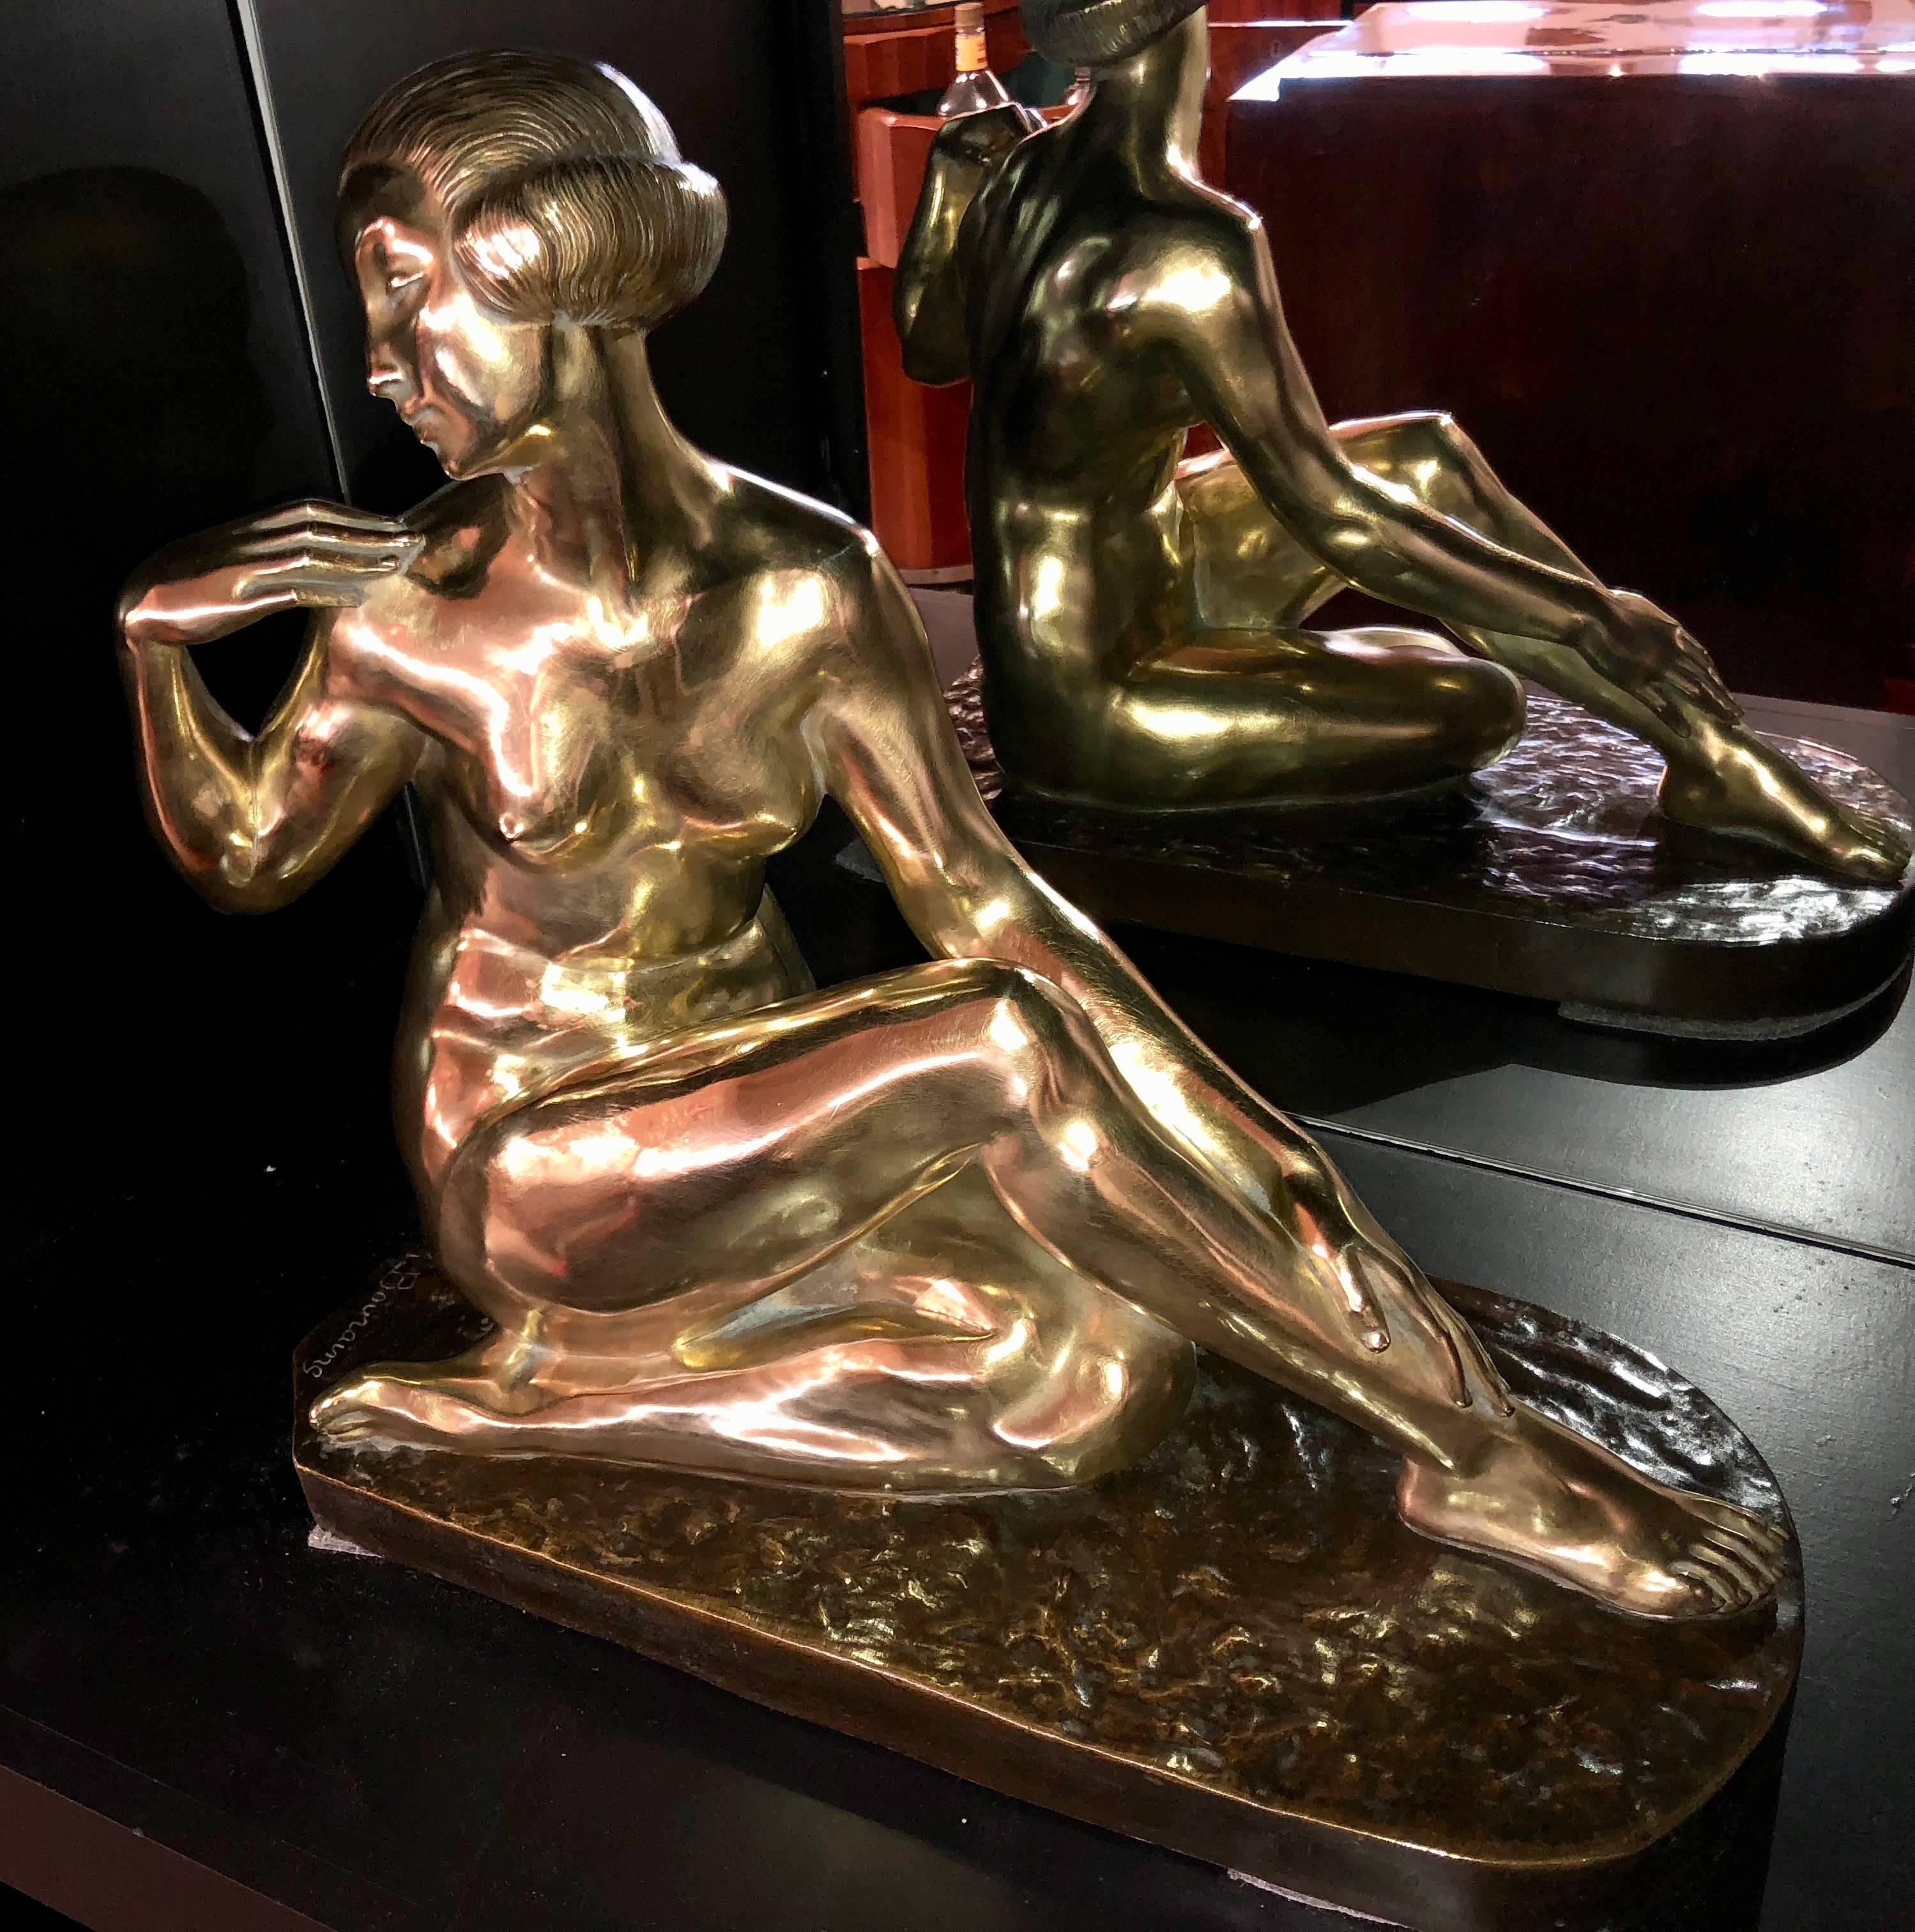 Powerful French Art Deco Bronze statue by important sculptor Marcel Bouraine. This stunning extra large bronze casting is very impressive (it appears twice the size of the largest bronzes in the shop). The shiny brass patina/finish gives this